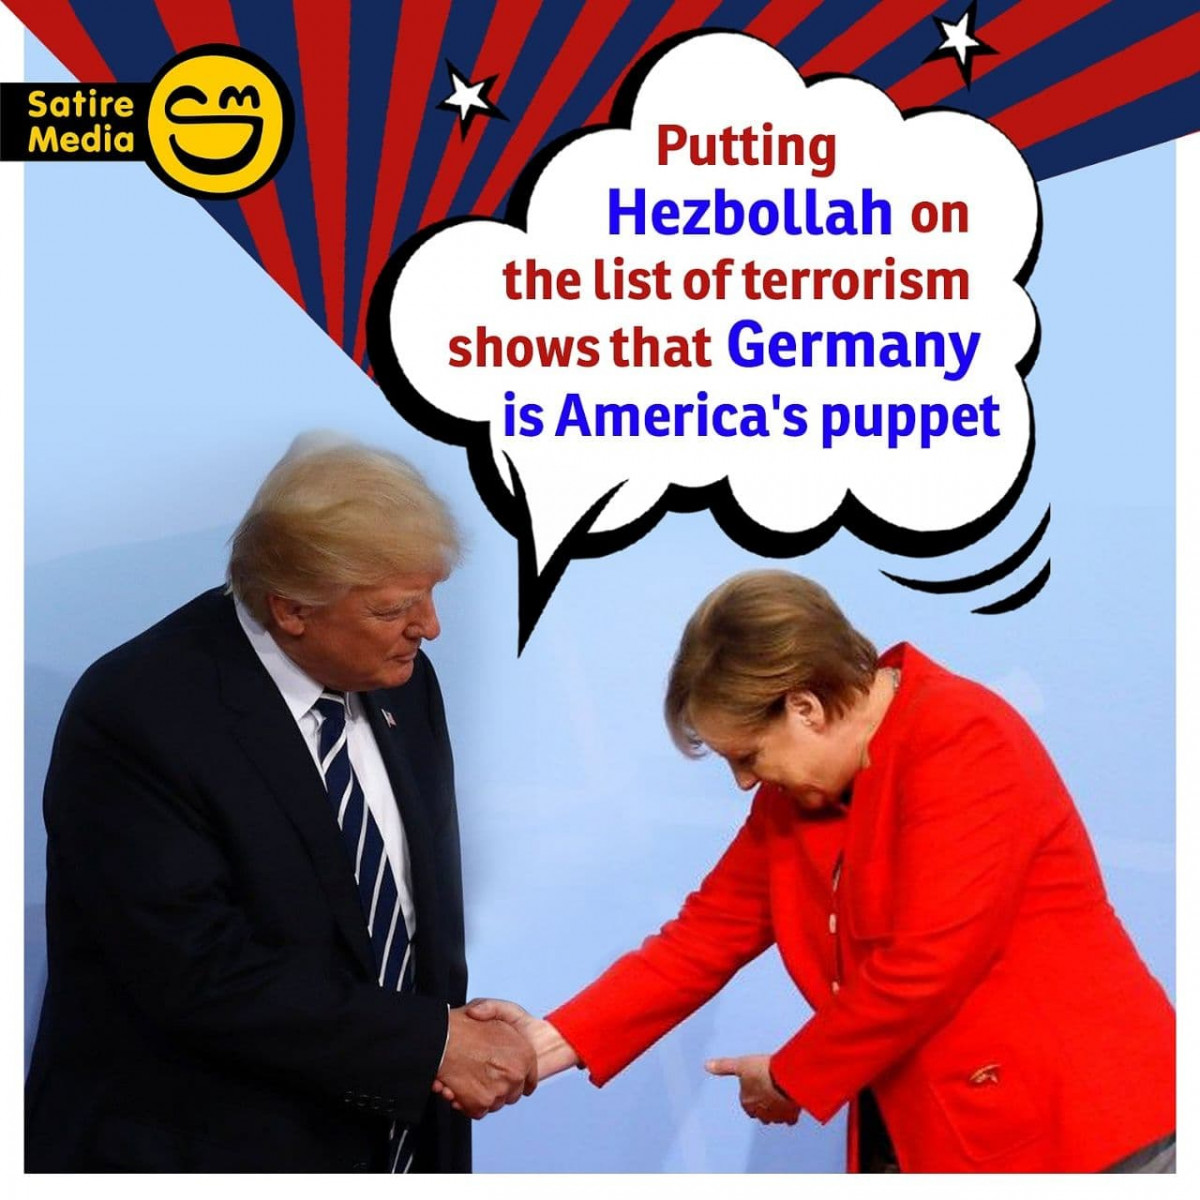 Putting Hezbollah on the list of terrorism shows that Germany is America's puppet